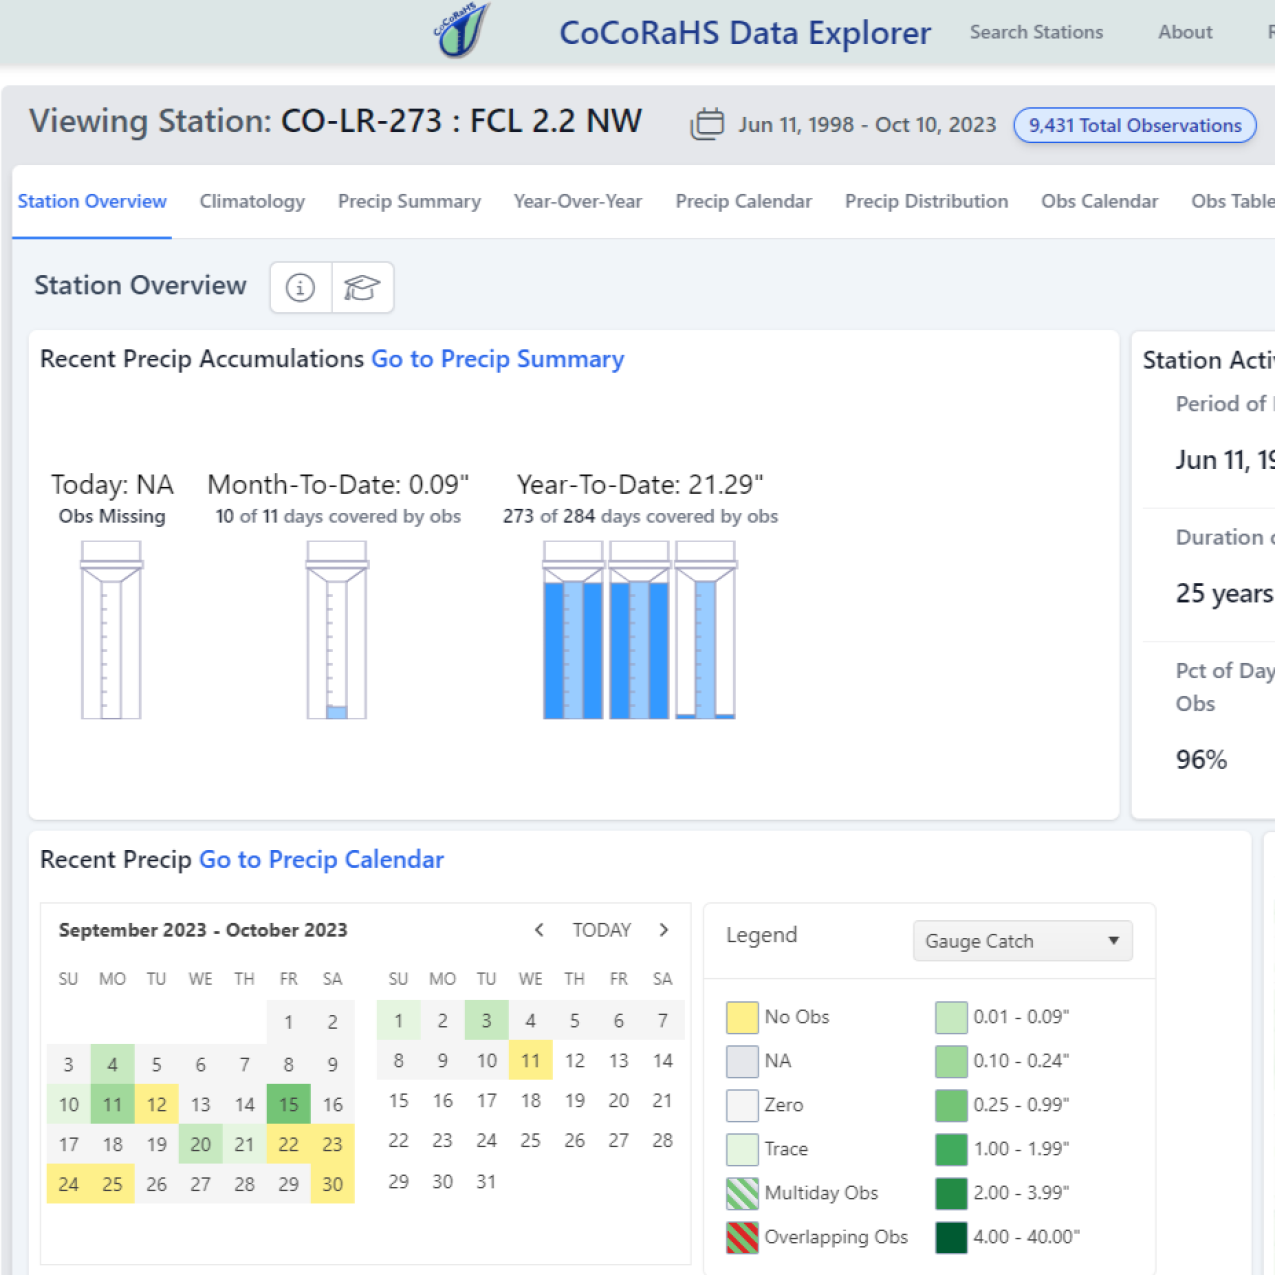 A screenshot of a web page dashboard that displays multiple types of data visualizations including rain gauge graphs filled with water, observation counts, and monthly calendars that visualize data collection over the years.